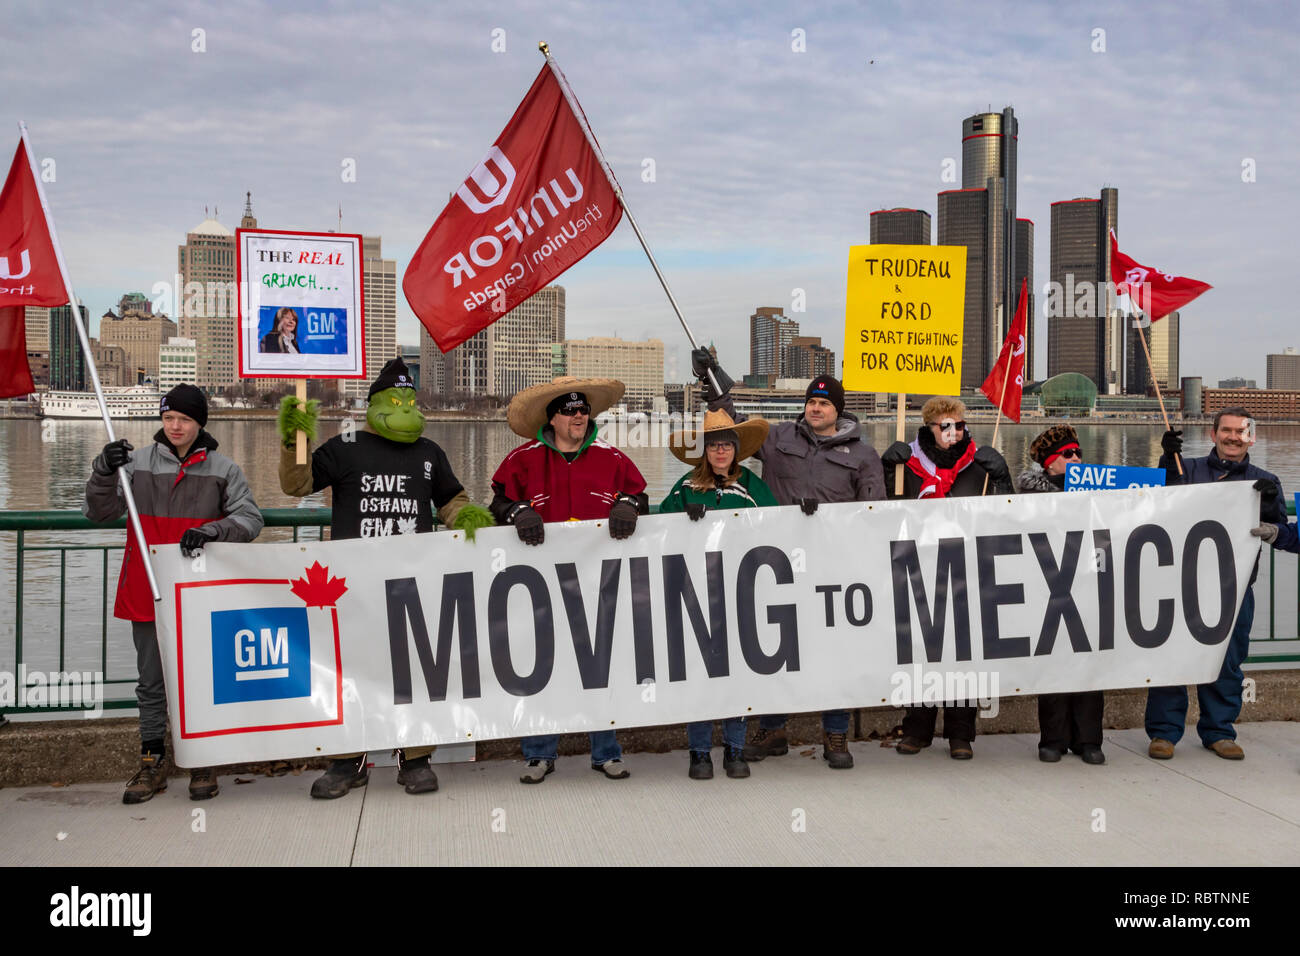 Windsor, Ontario, Canada - 11 January 2019 - Canadian auto workers, members of the Unifor labor union, rallied across the Detroit River from the General Motors headquarters in Detroit to protest GM's plan to close the Oshawa, Ontario assembly plant, throwing thousands out of work. Credit: Jim West/Alamy Live News Stock Photo